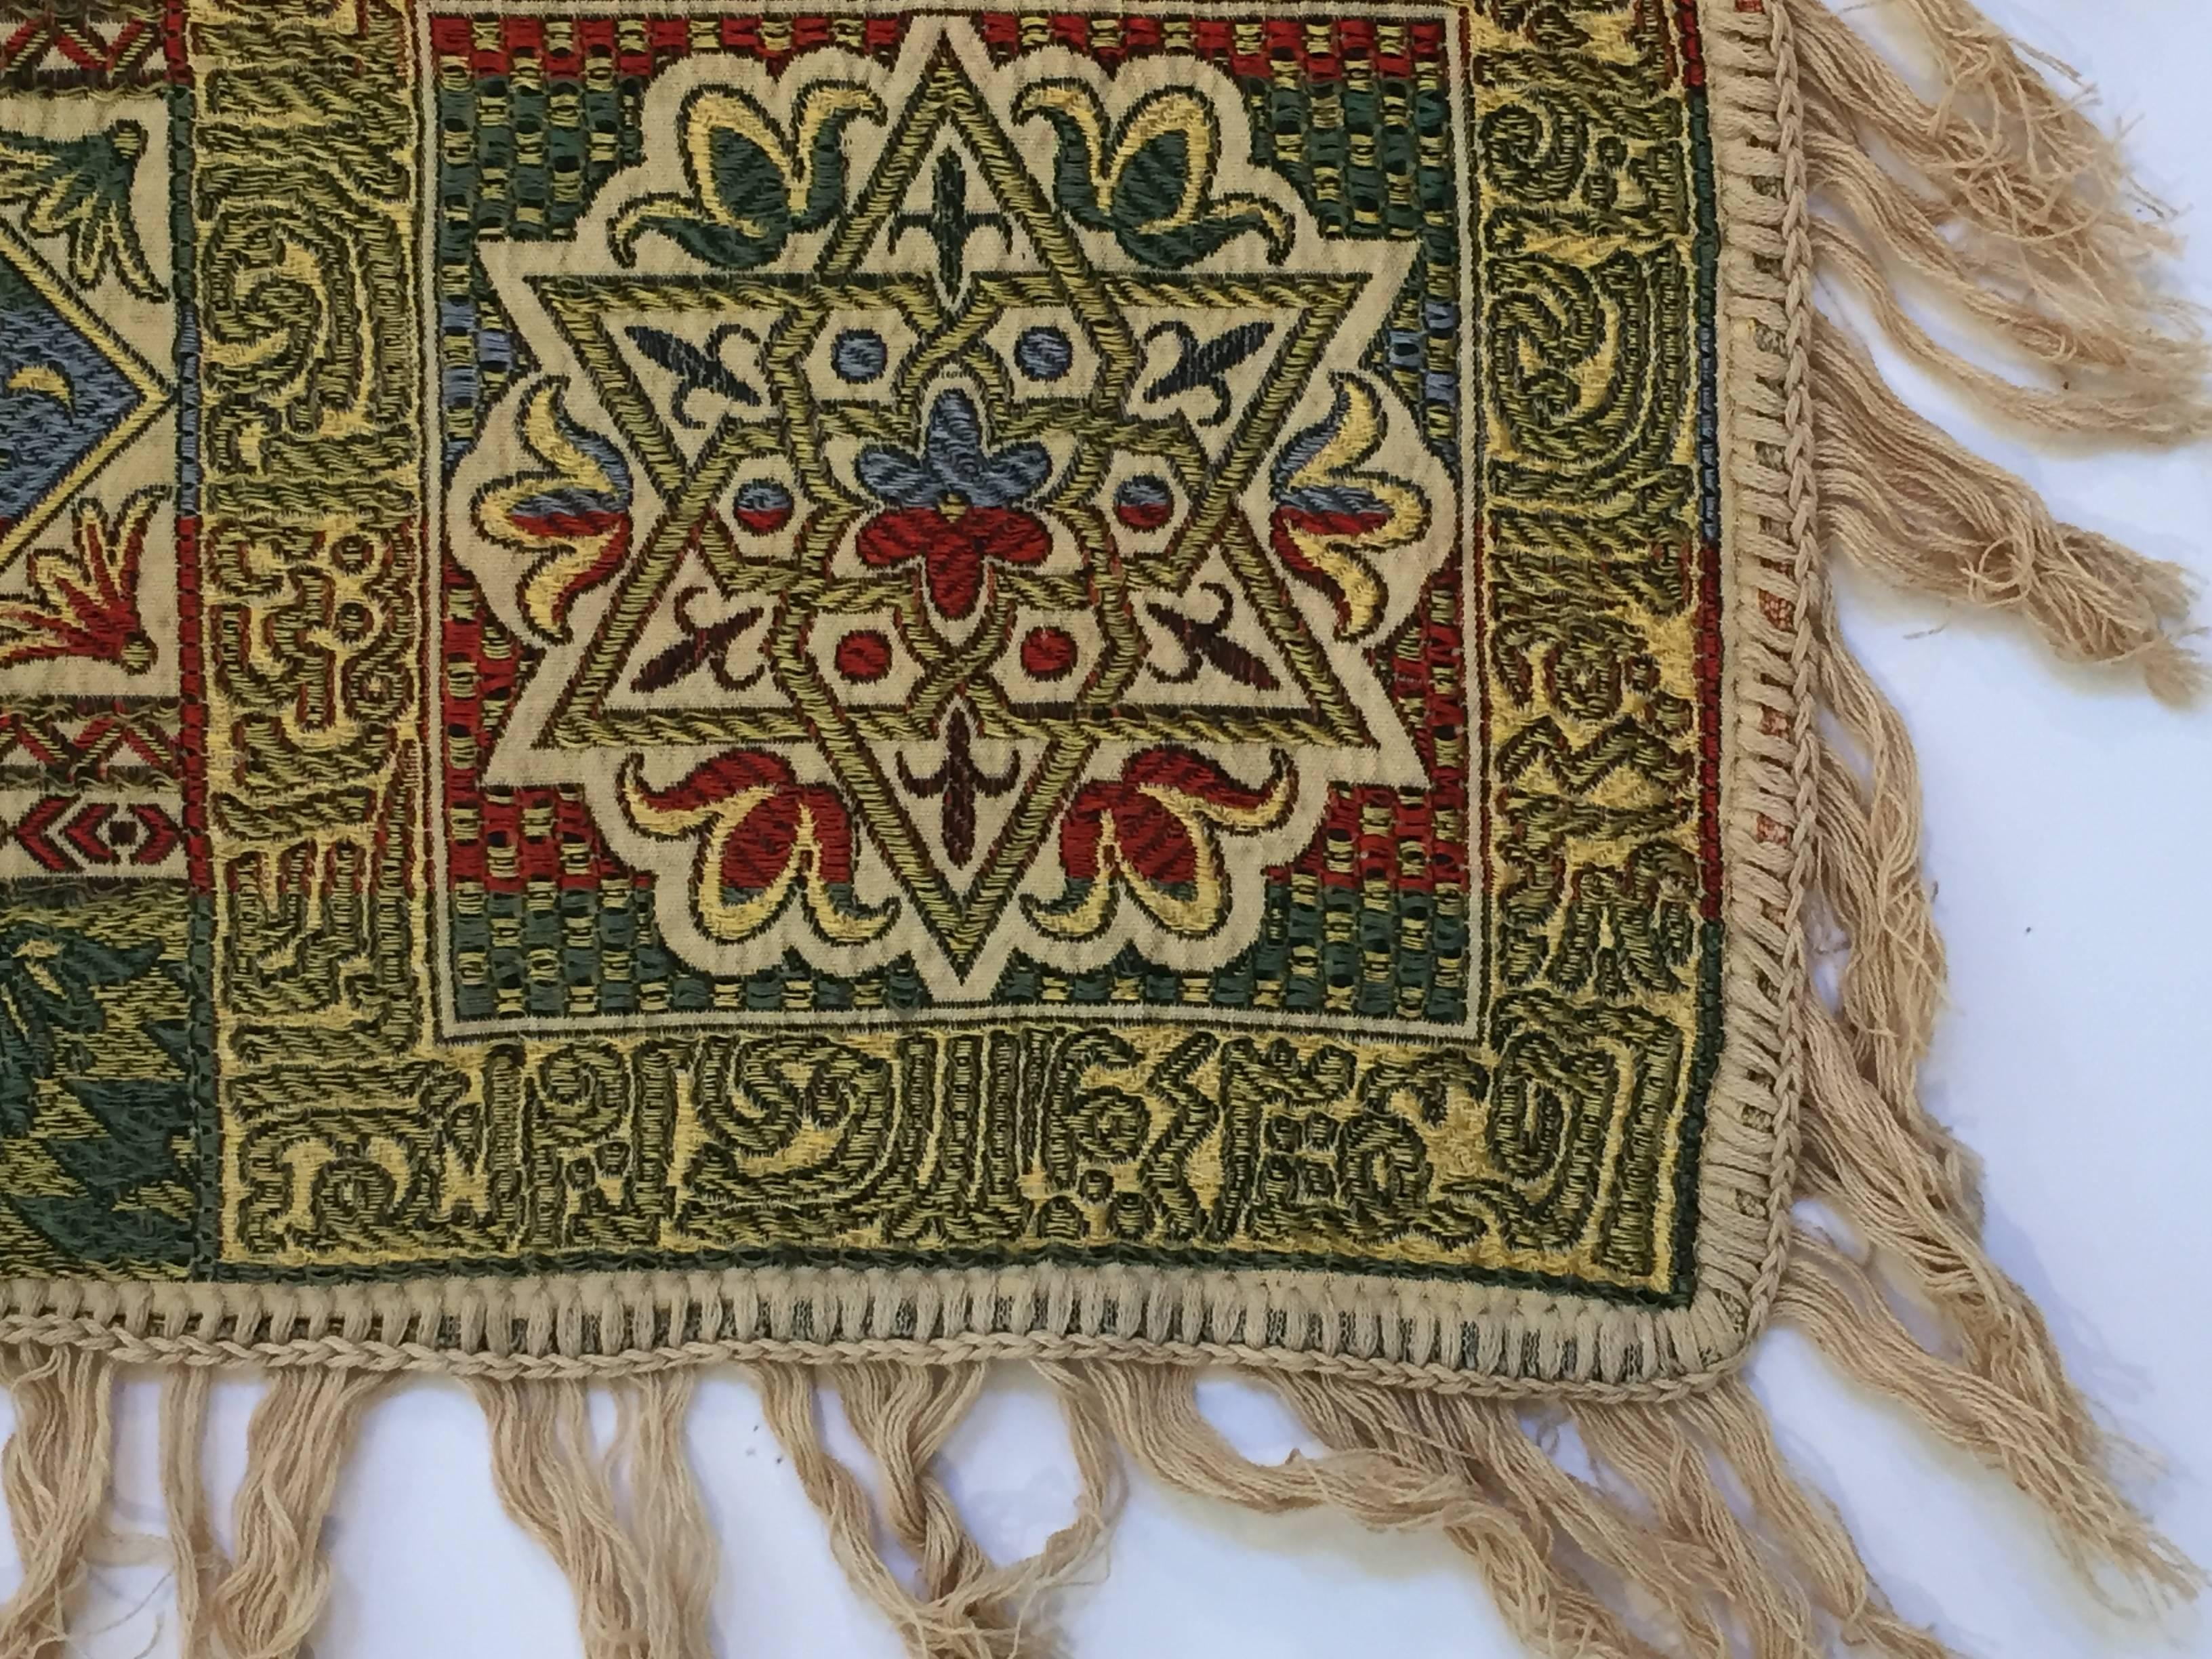 Granada, Islamic Spain, great textile with ivory color fringes featuring Moorish floral and geometric designs with calligraphy Arabic writing.
Colors are earth tone in green, blue, ivory and deep Moroccan red.
Could be used as a piano shawl, sofa